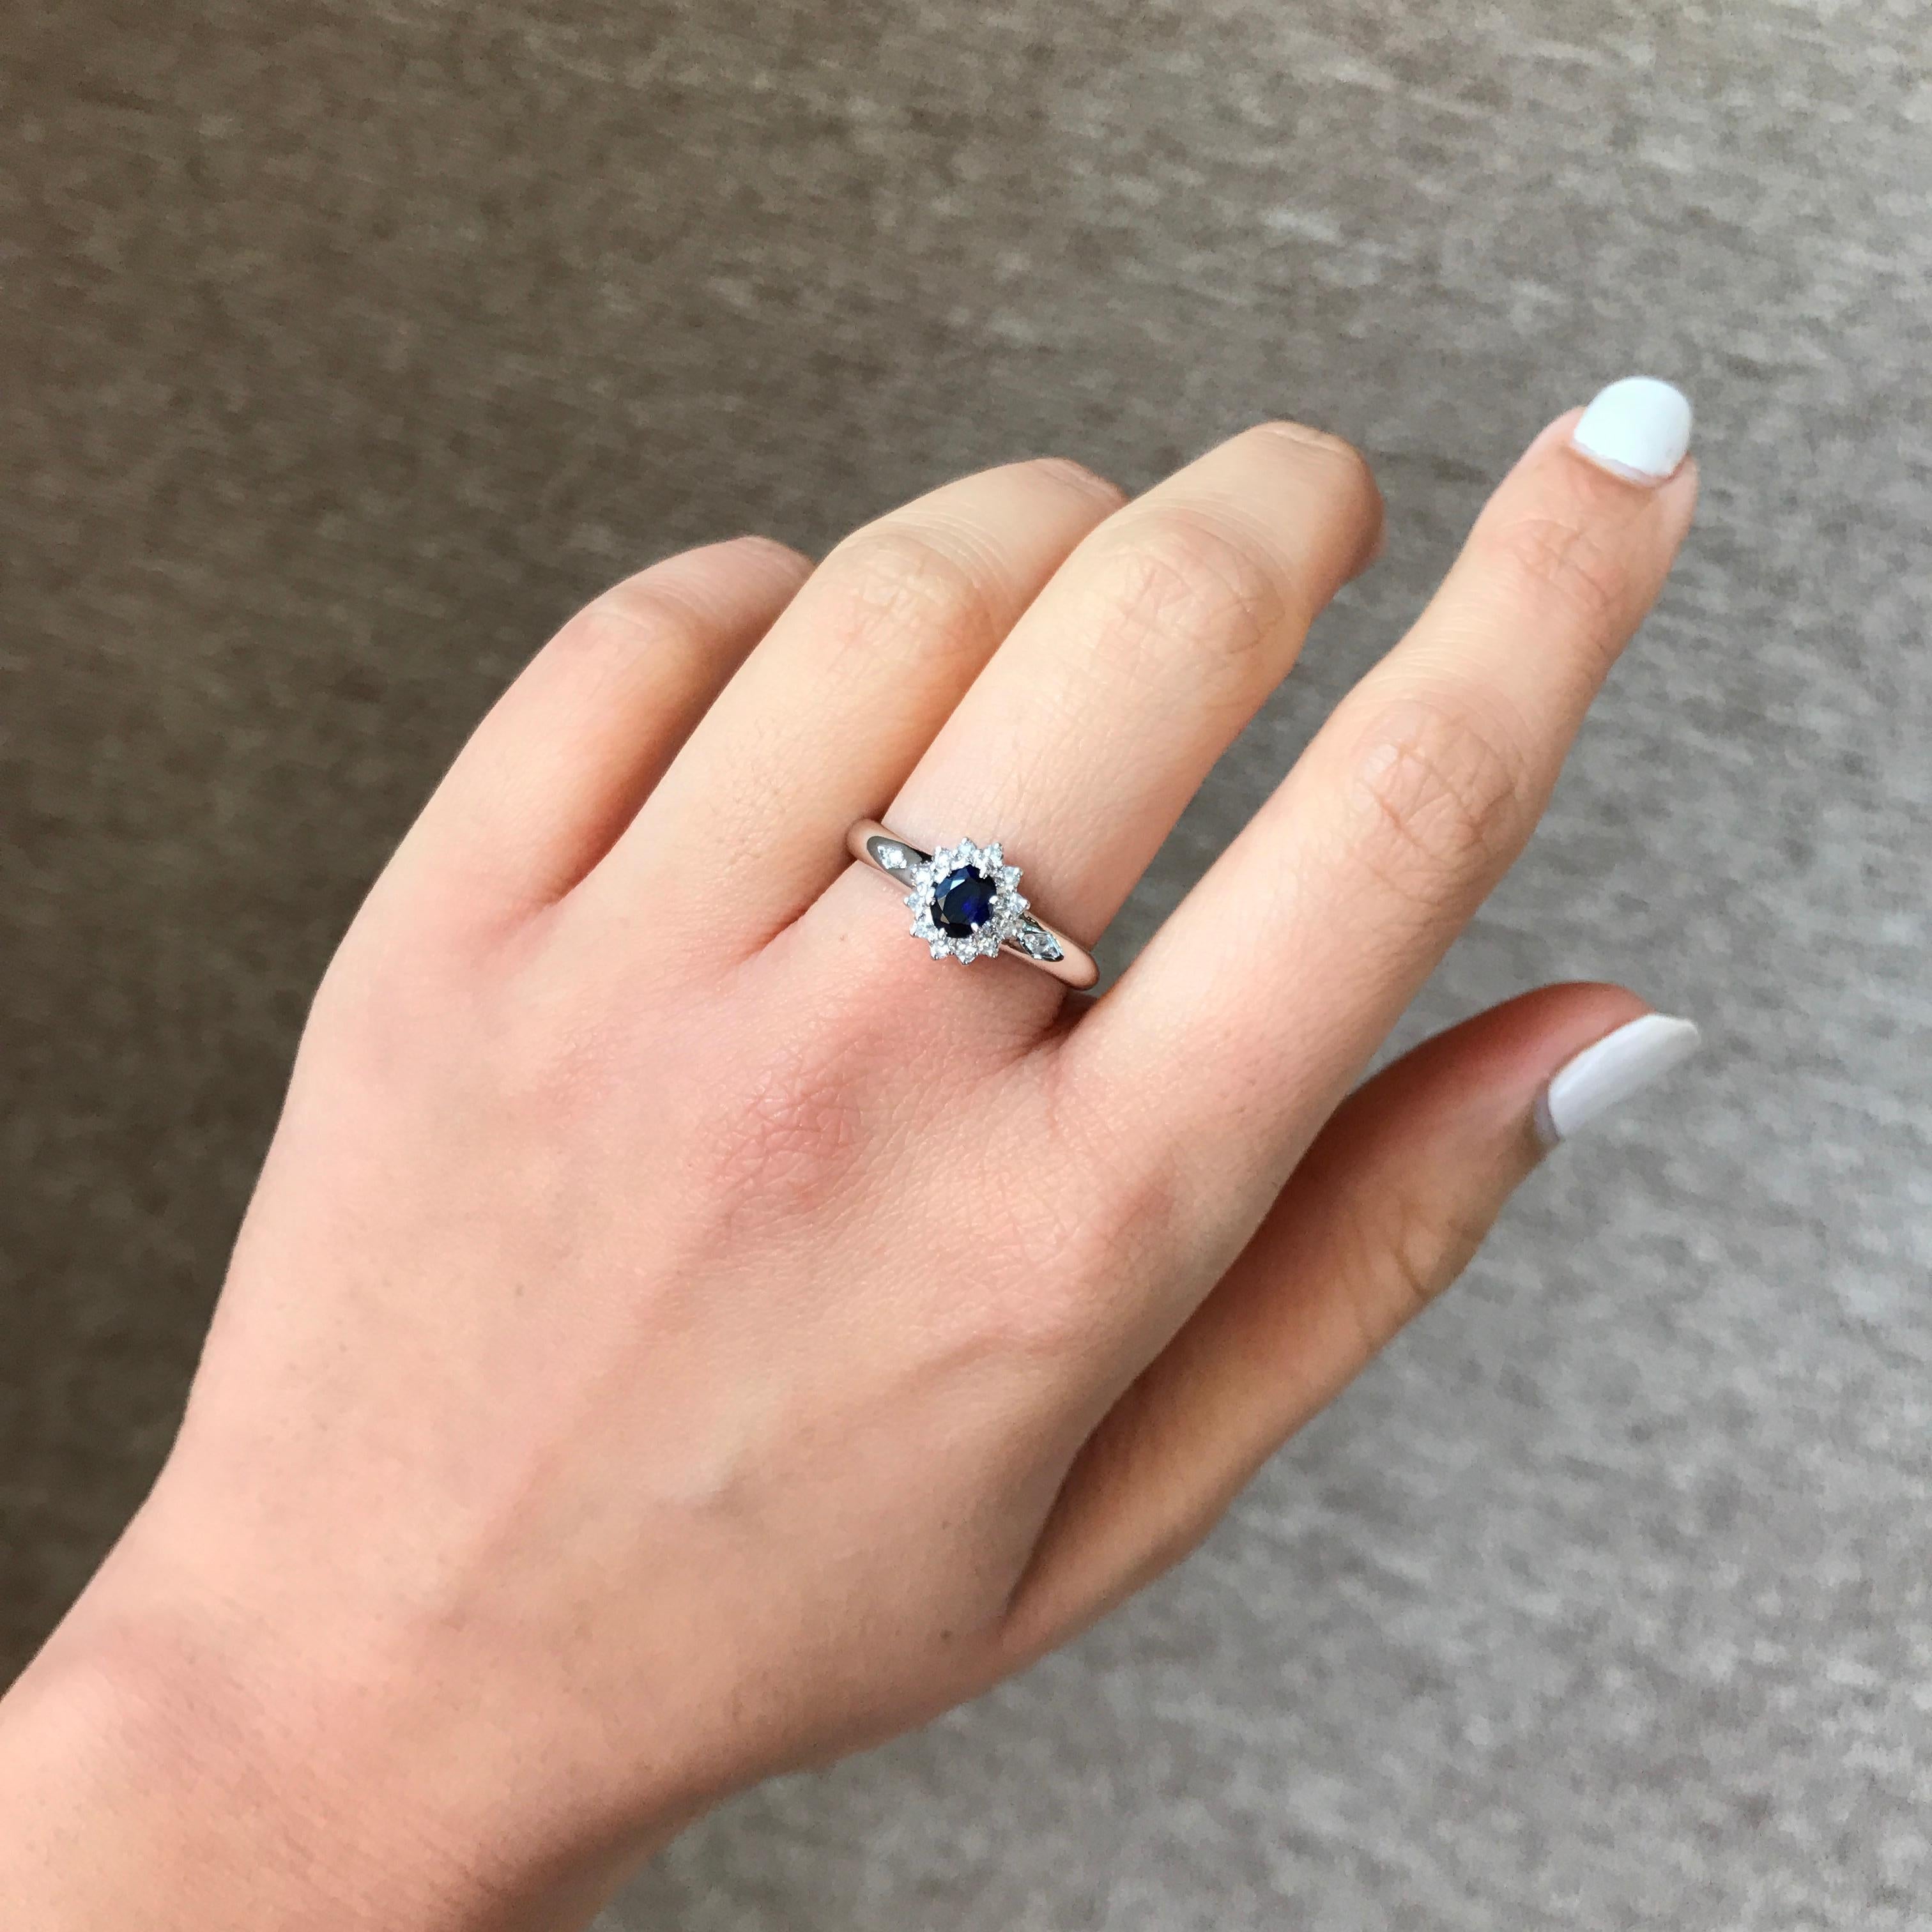 An elegant and simple ring using a lustrous Blue Sapphire centre stone surrounded by brilliant cut white Diamonds, all set in 14K white gold. Currently a ring size US 6.5, but we can resize the ring for you without additional cost.